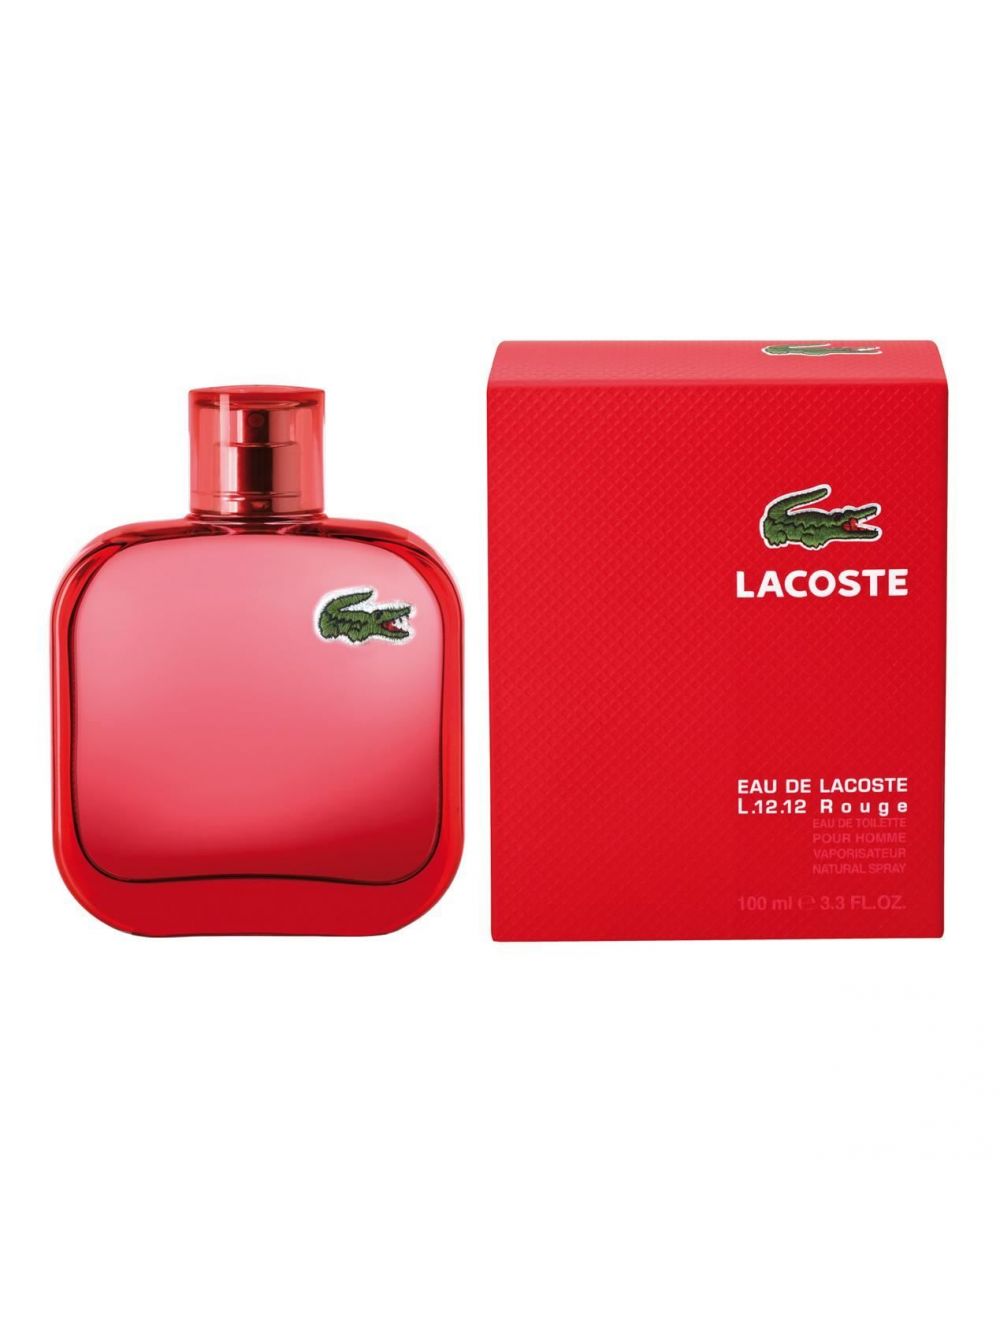 LACOSTE 12.12 ROUGE 100ML